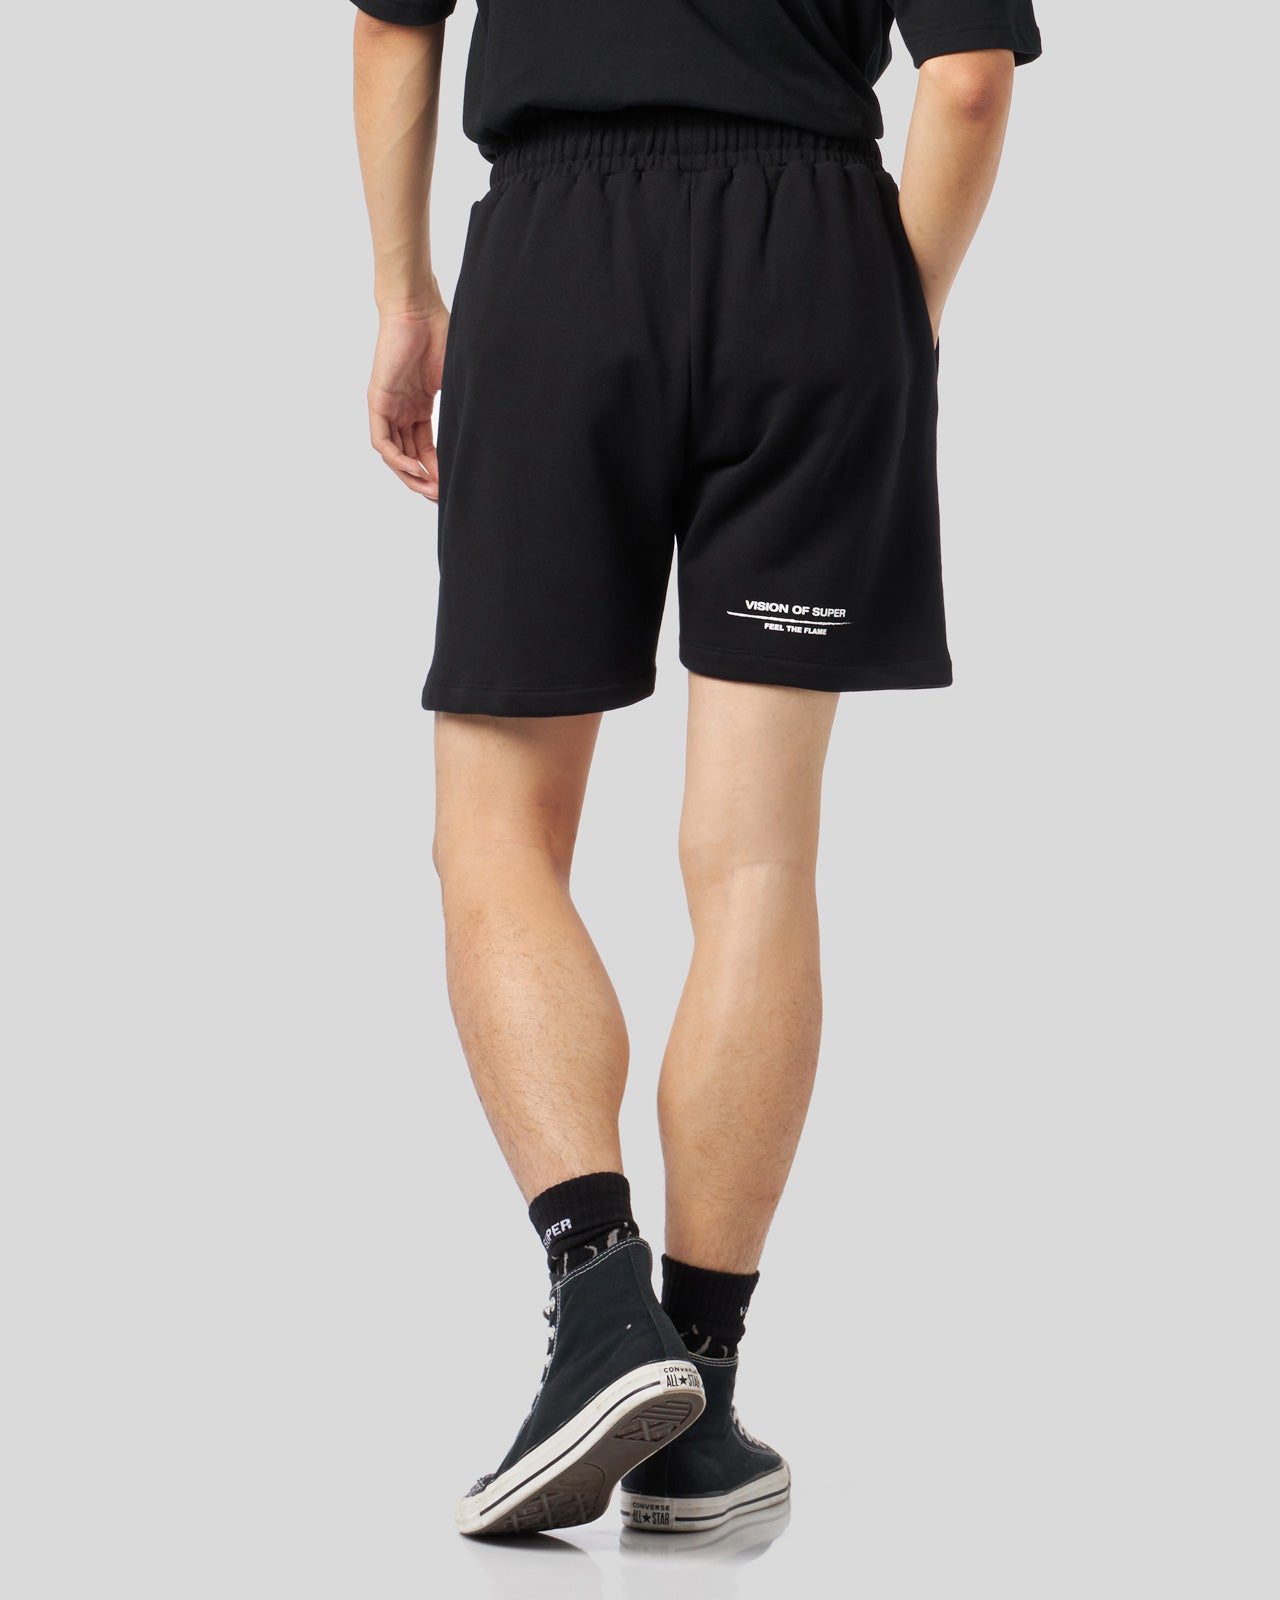 BLACK SHORTS WITH FLAMES LOGO